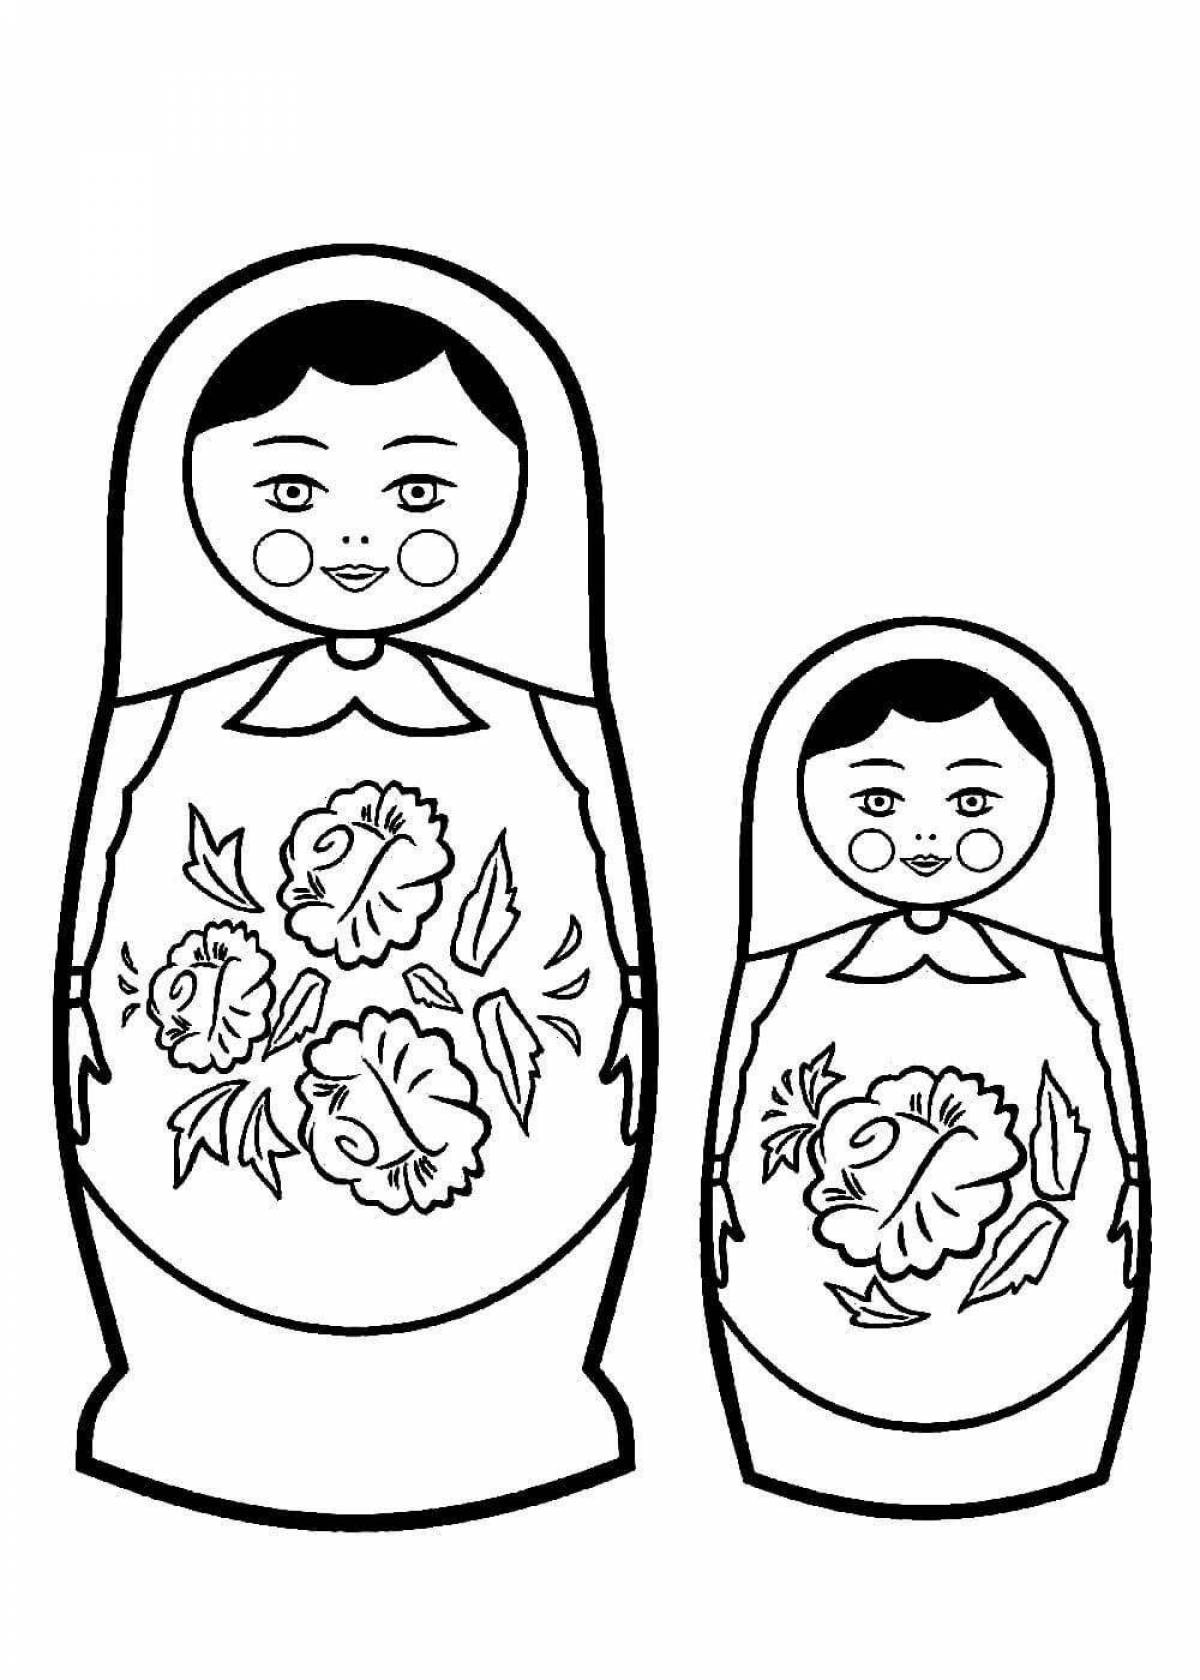 Charming matryoshka by numbers coloring